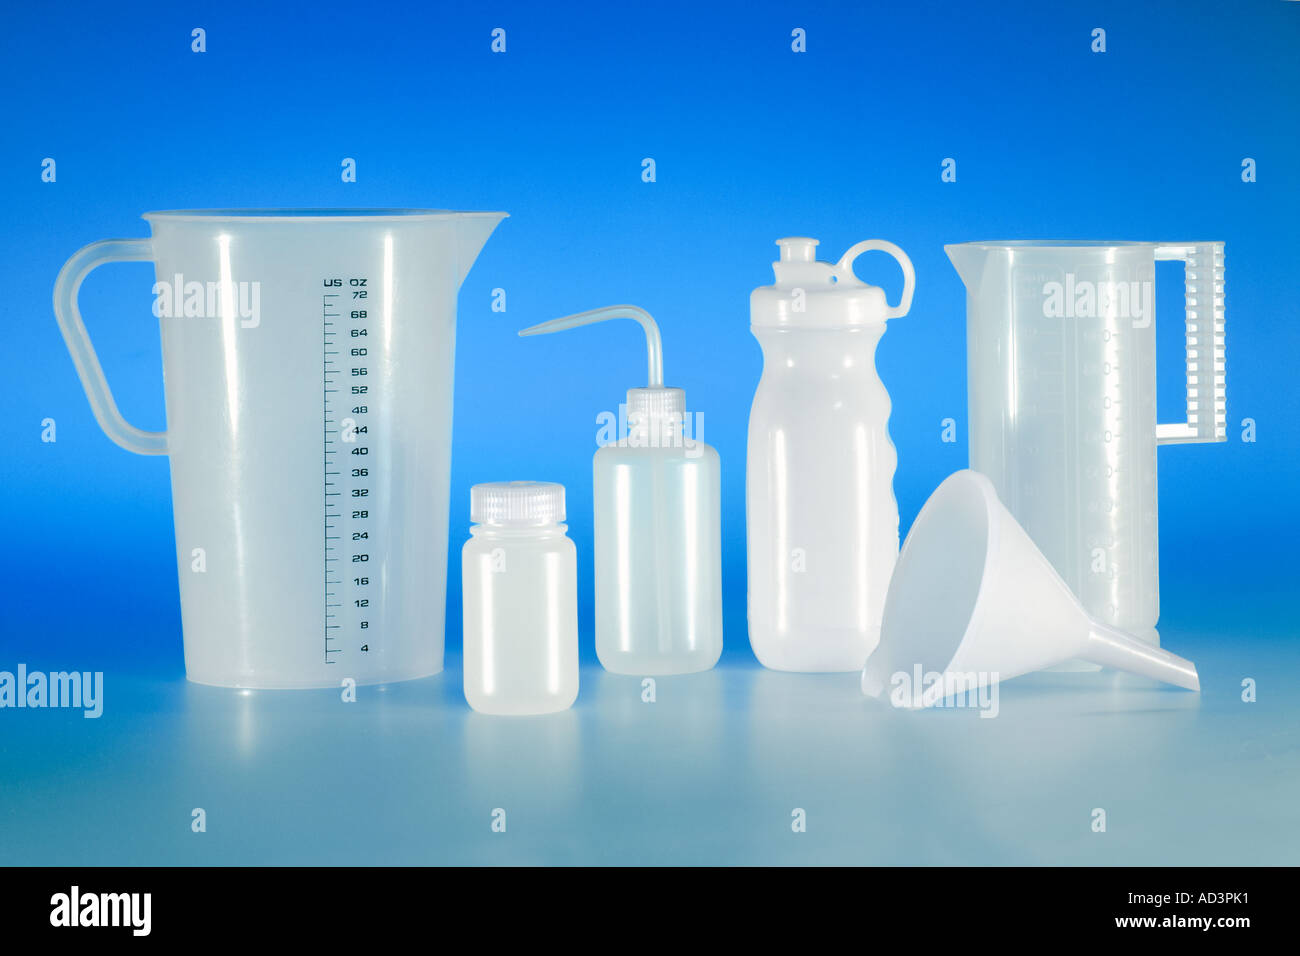 High Density Polyethylene Containers Stock Photo